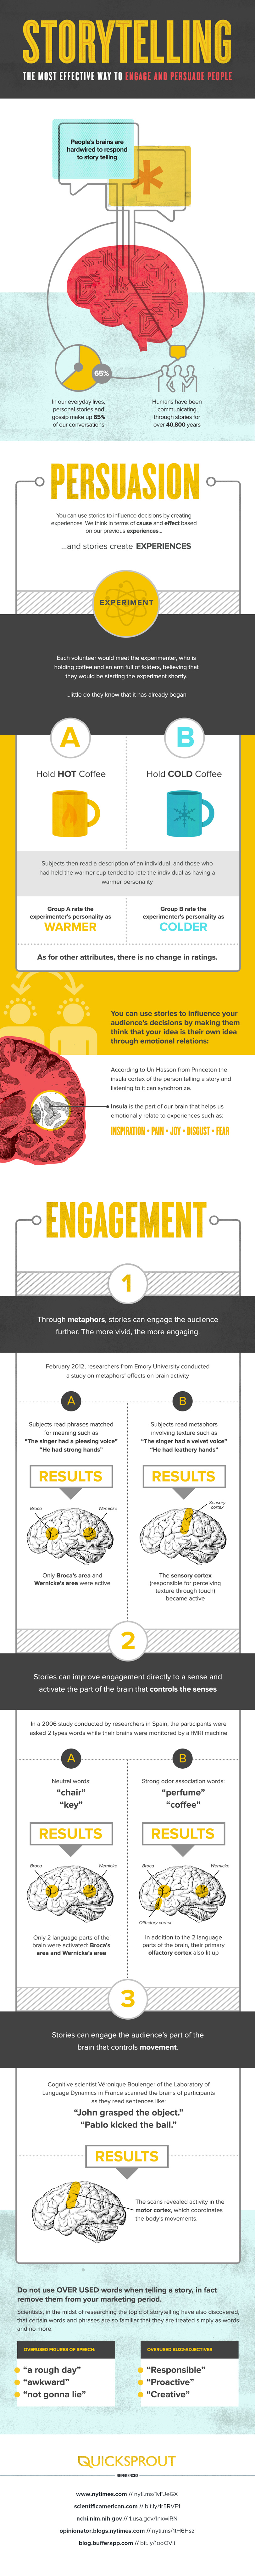 Quick Sprout infographic on How to Engage and Persuade People Through Storytelling